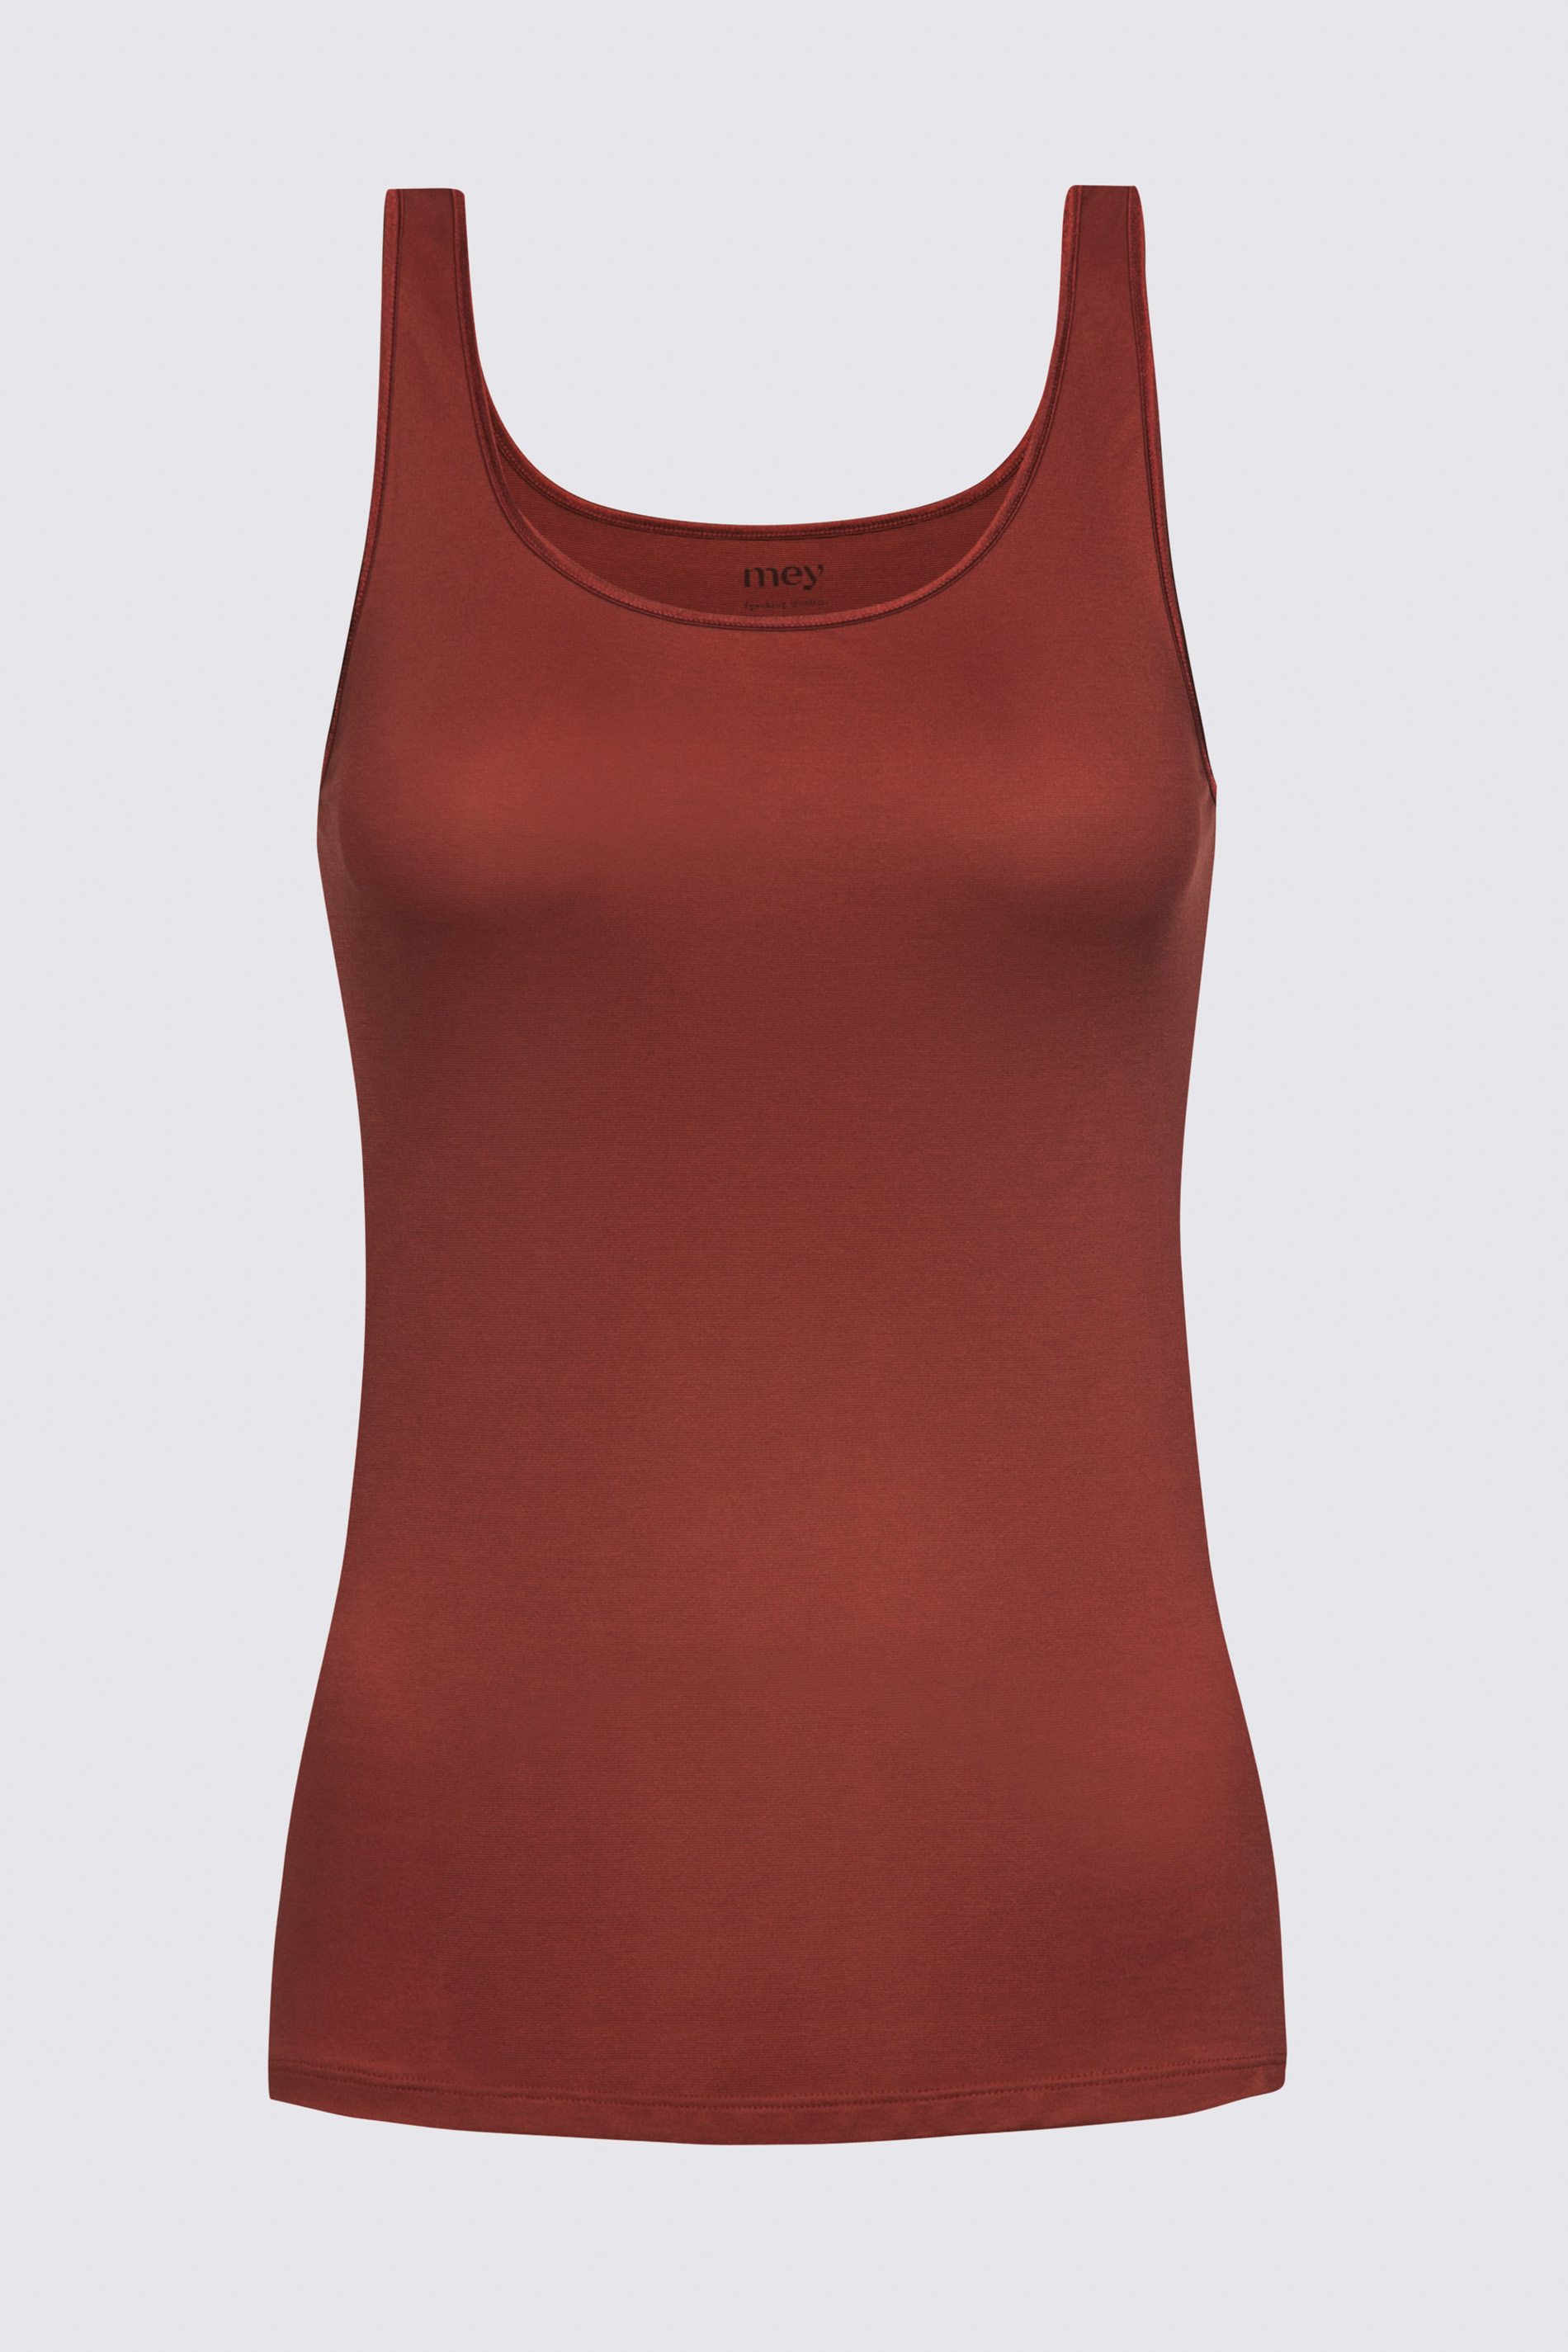 Camisole in white Red Pepper Serie Emotion Cut Out | mey®